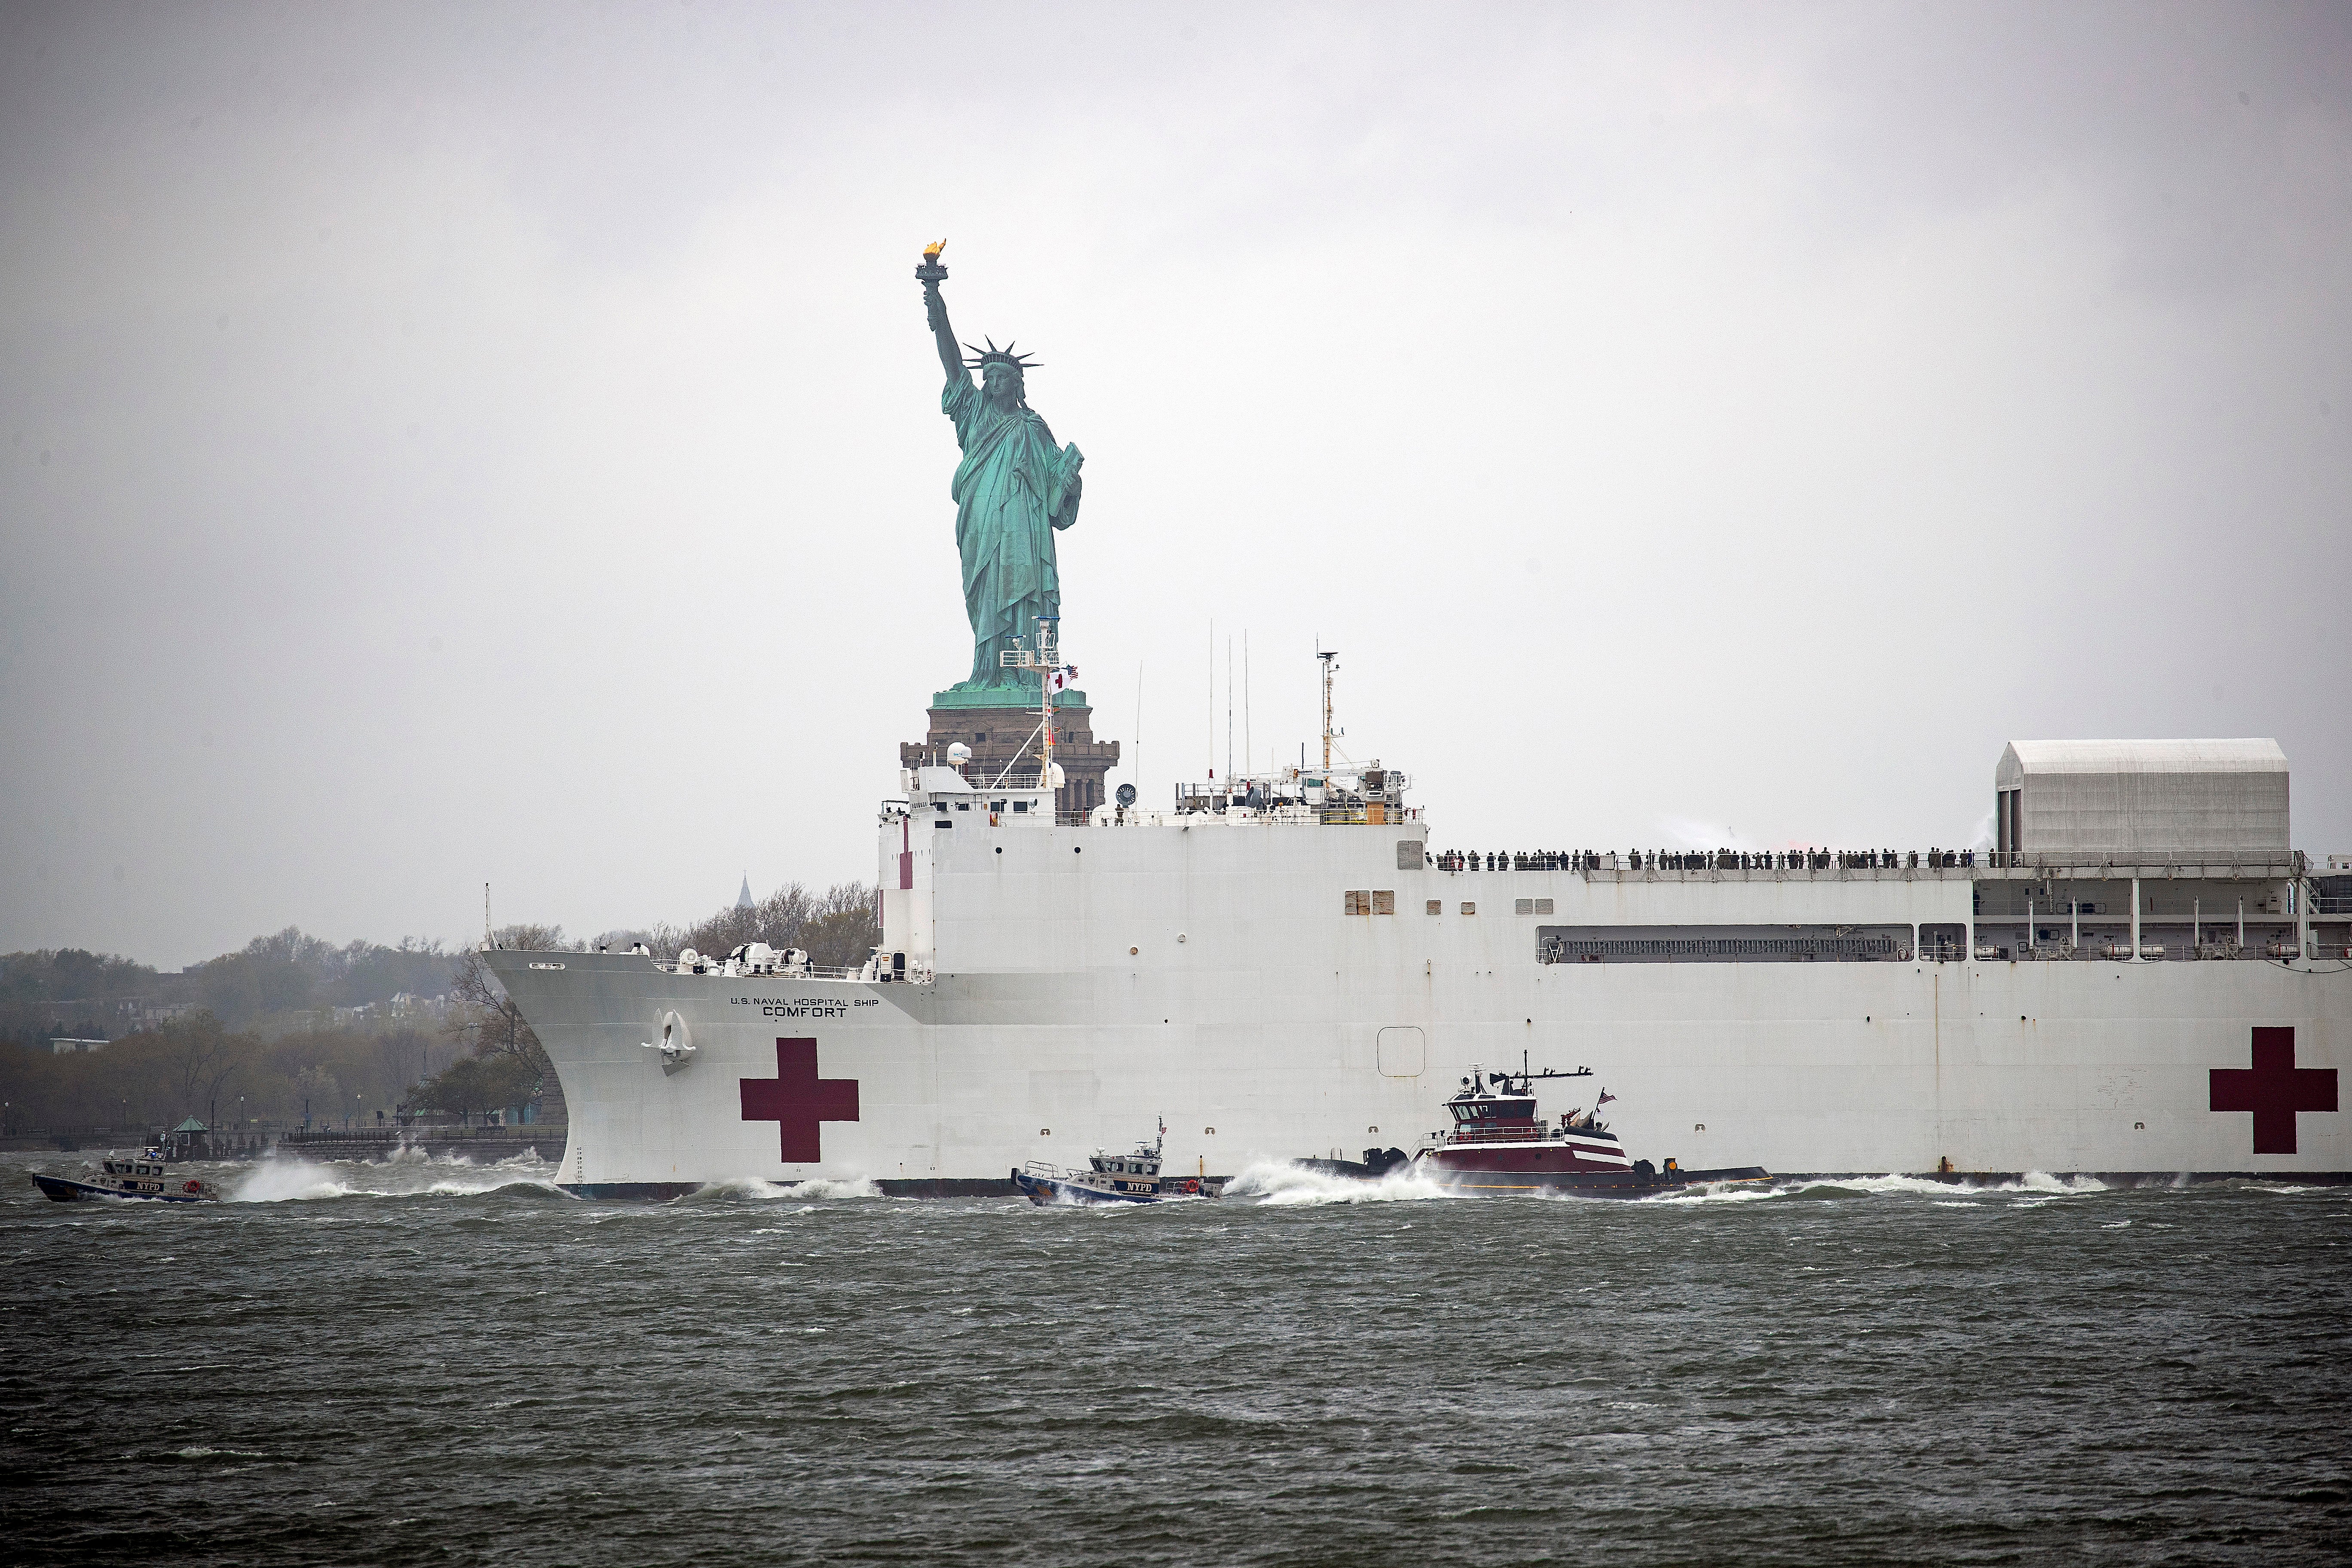 The USNS Comfort hospital ship exits the harbor in front of the Statue of Liberty as it heads back to Naval Station Norfolk in Virginia on April 30, 2020 in the Red Hook neighborhood of the Brooklyn borough of New York City.